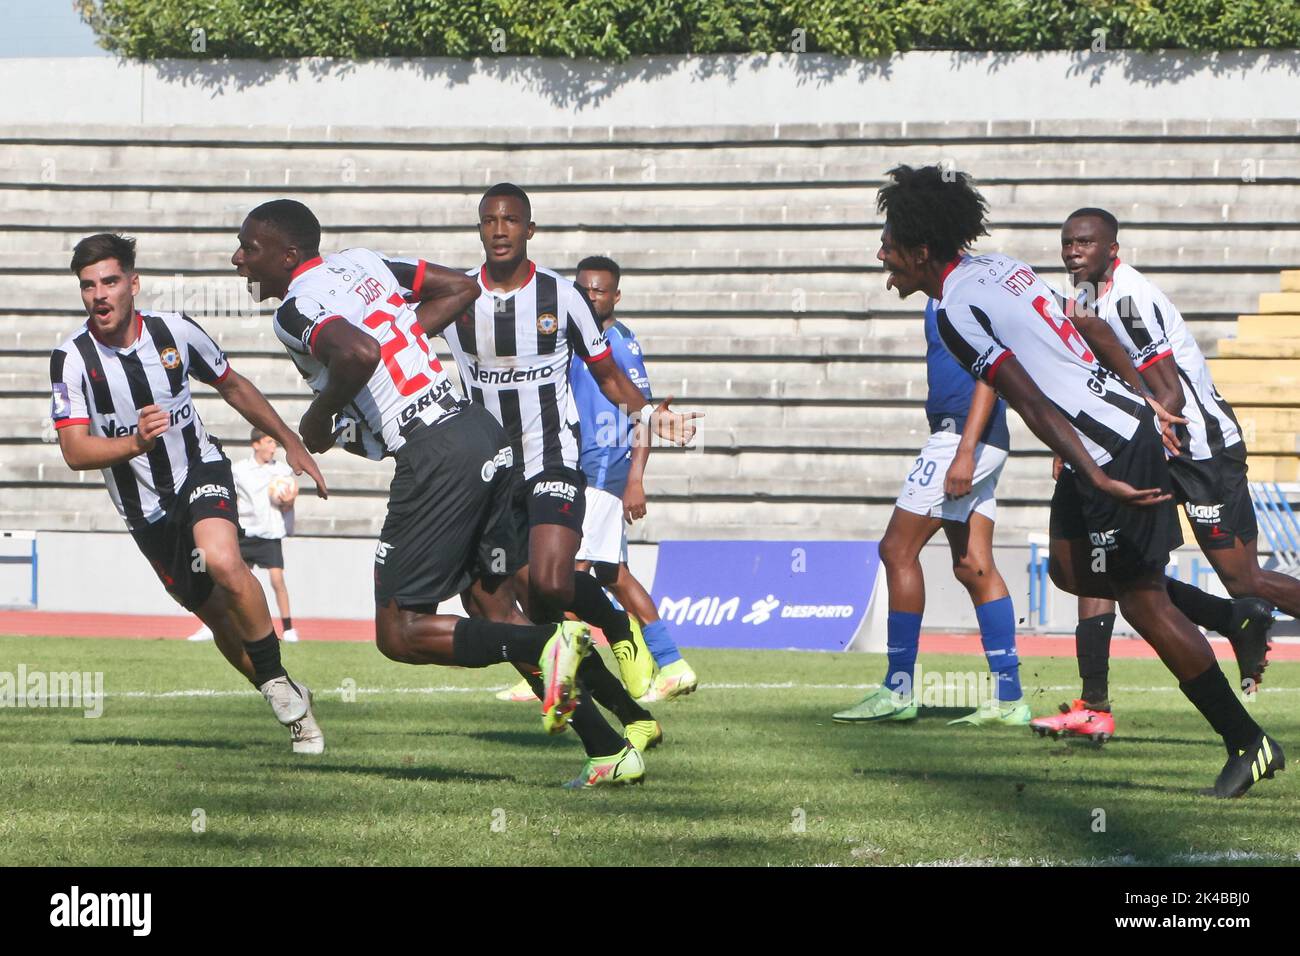 https://c8.alamy.com/comp/2K4BBJ0/maia-10012022-varzim-sport-club-hosted-clube-desportivo-feirense-this-afternoon-at-estdio-municipal-dr-jos-vieira-de-carvalho-in-maia-in-the-2nd-round-of-the-portuguese-cup-20222023-varzims-gscored-byd-by-ze-augusto-jos-carmo-global-imagessipa-usa-2K4BBJ0.jpg